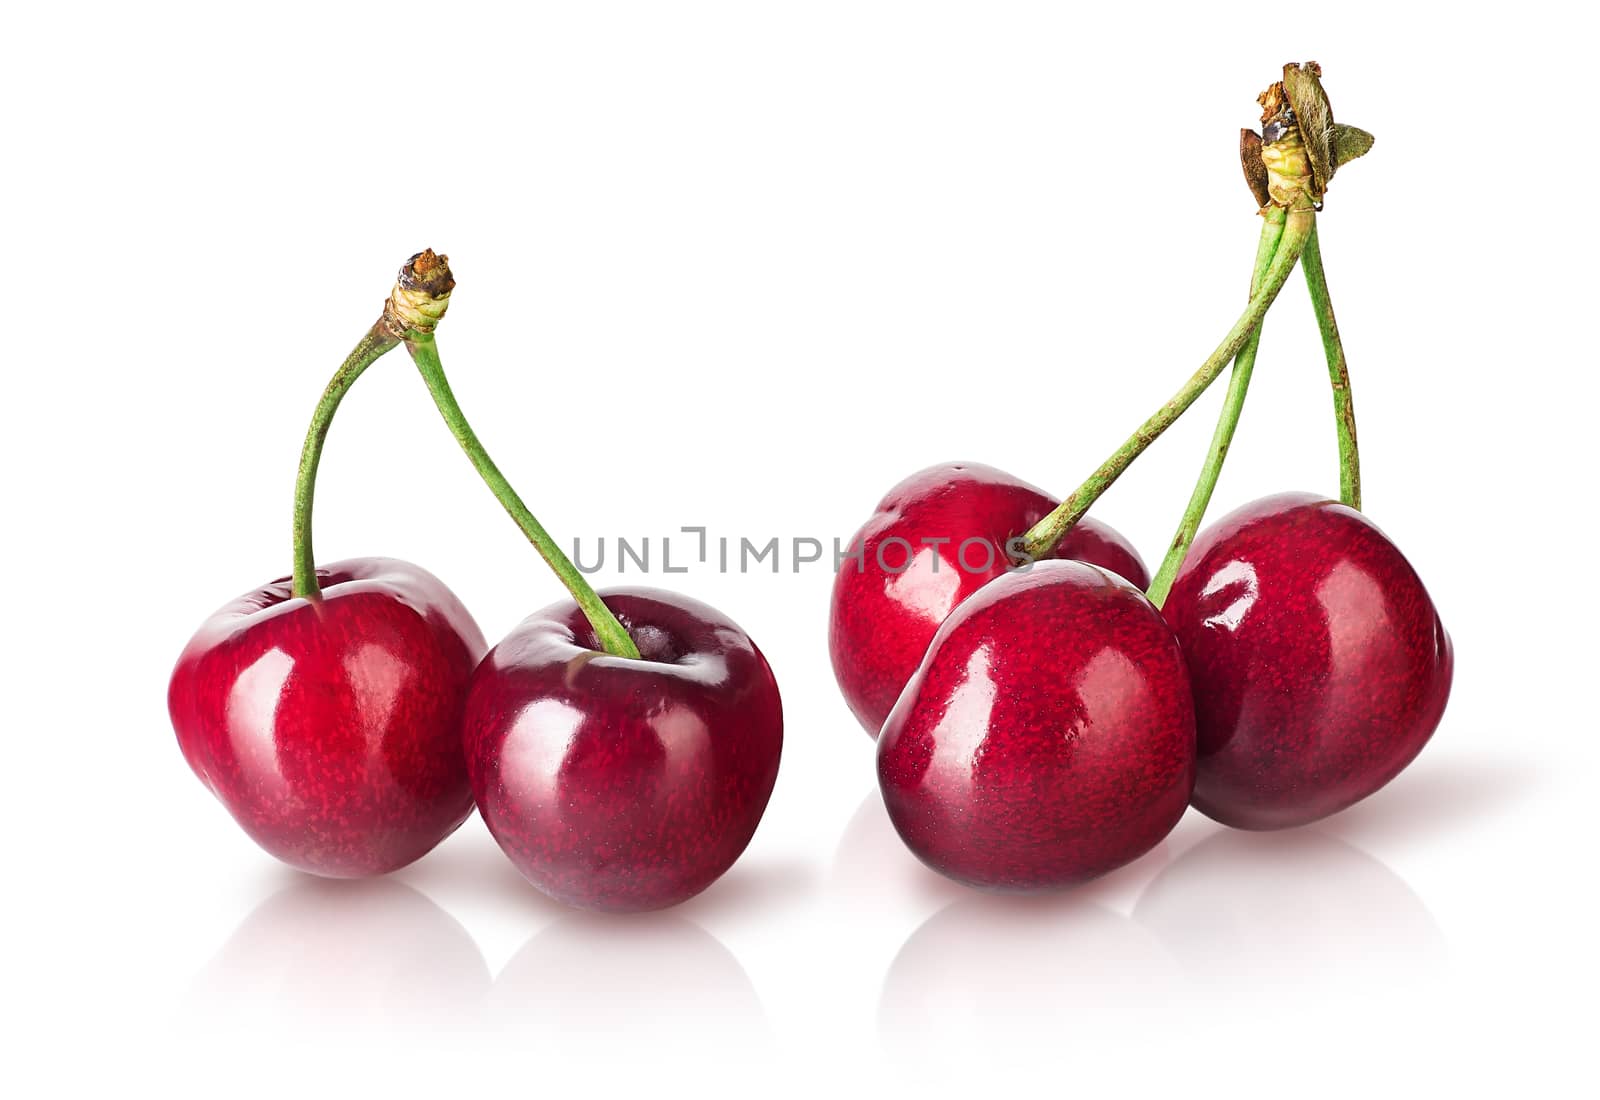 Several perfect sweet cherries by Cipariss